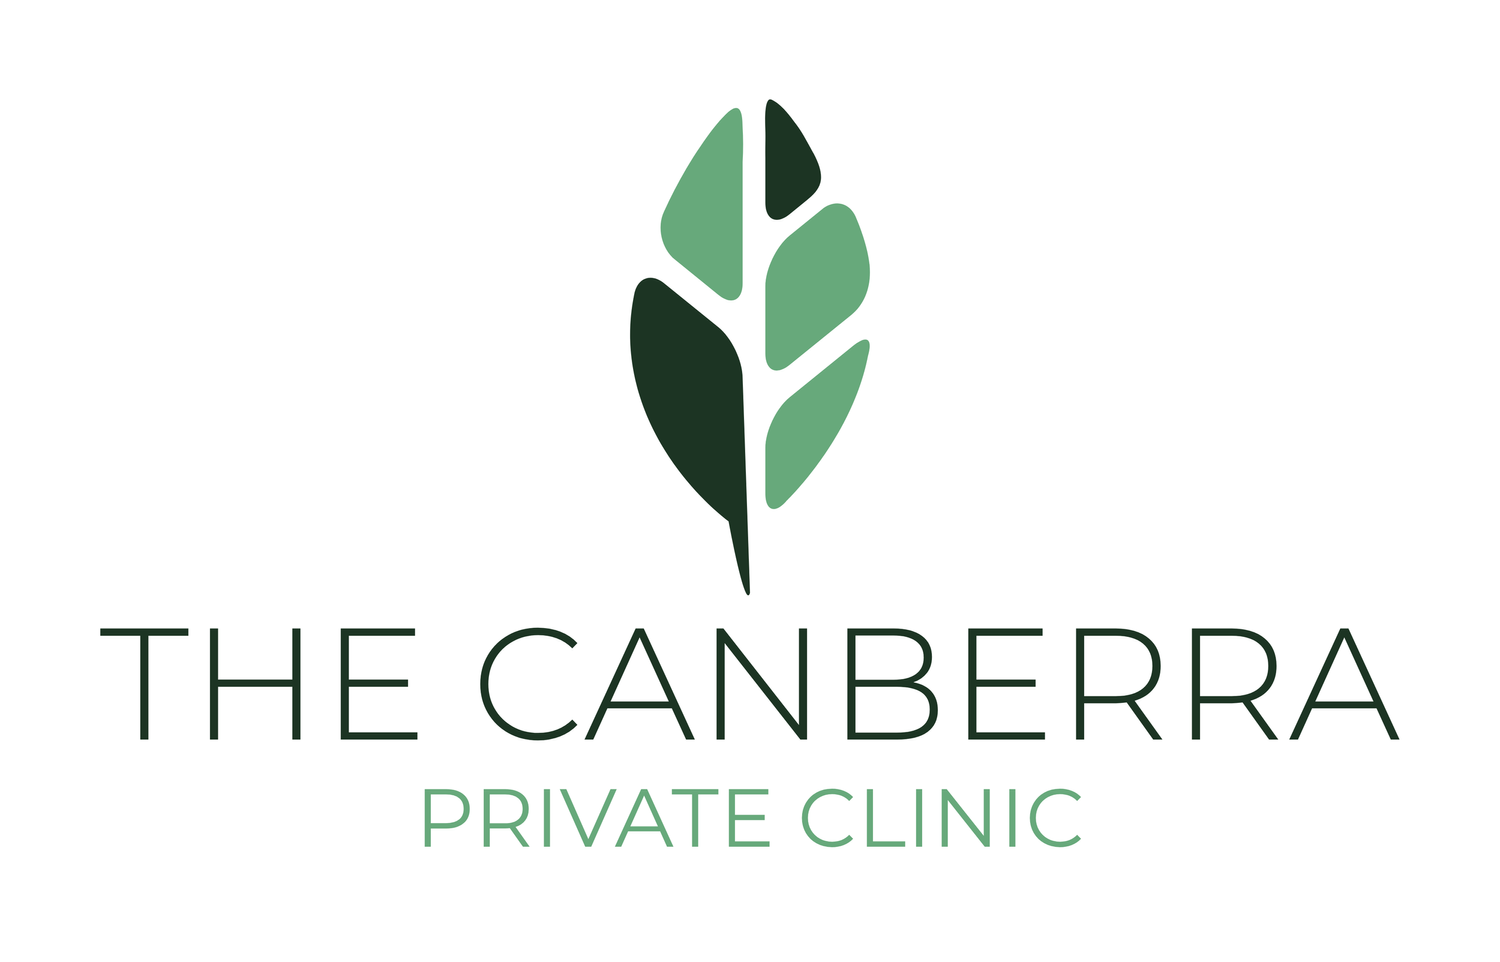 The Canberra Private Clinic